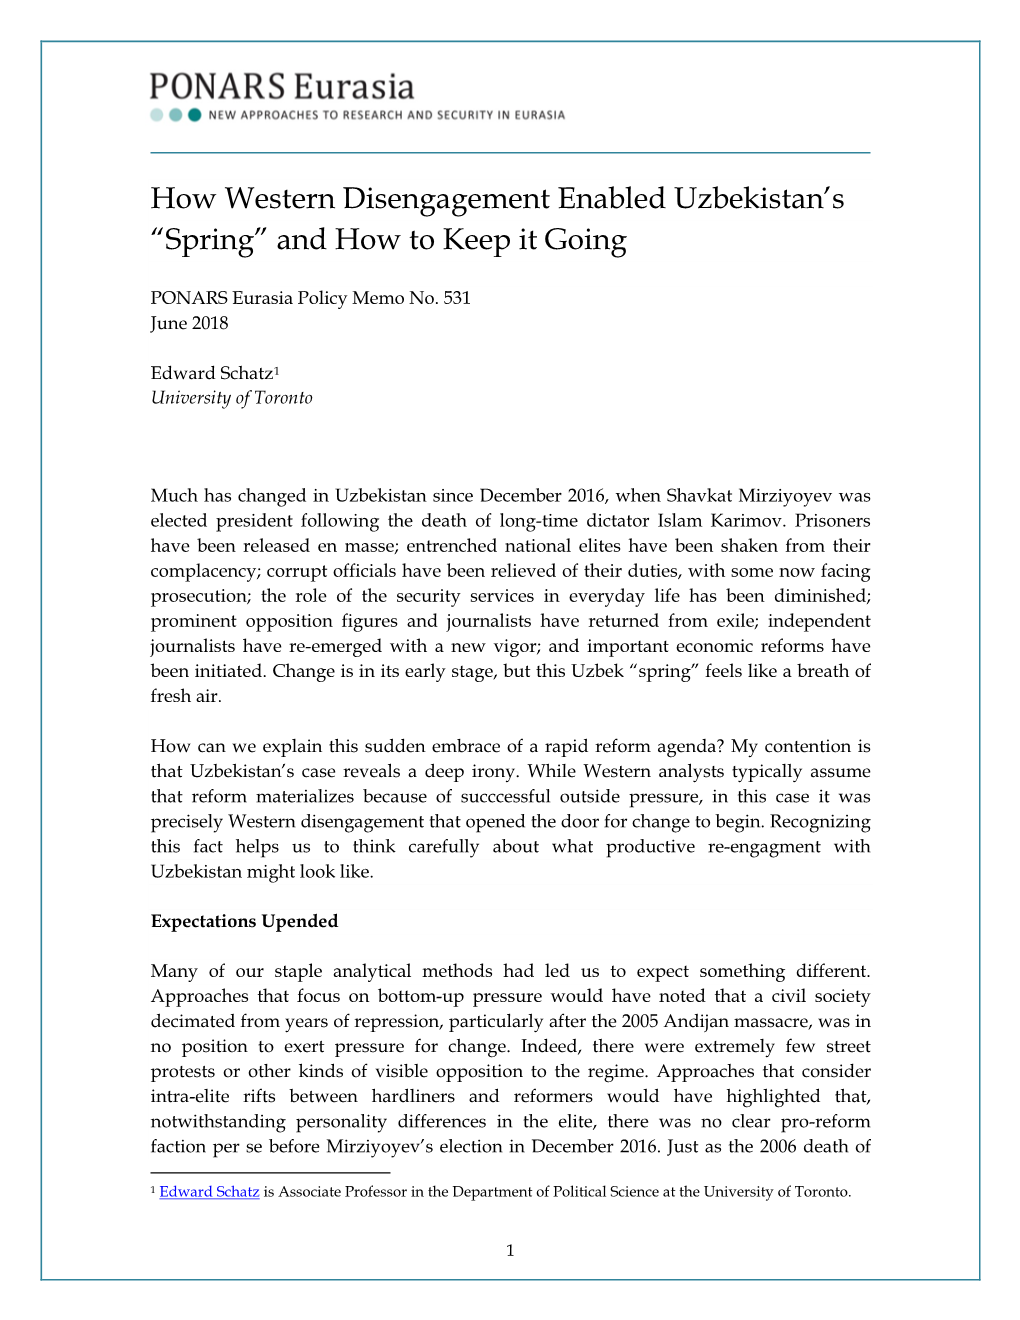 How Western Disengagement Enabled Uzbekistan’S “Spring” and How to Keep It Going